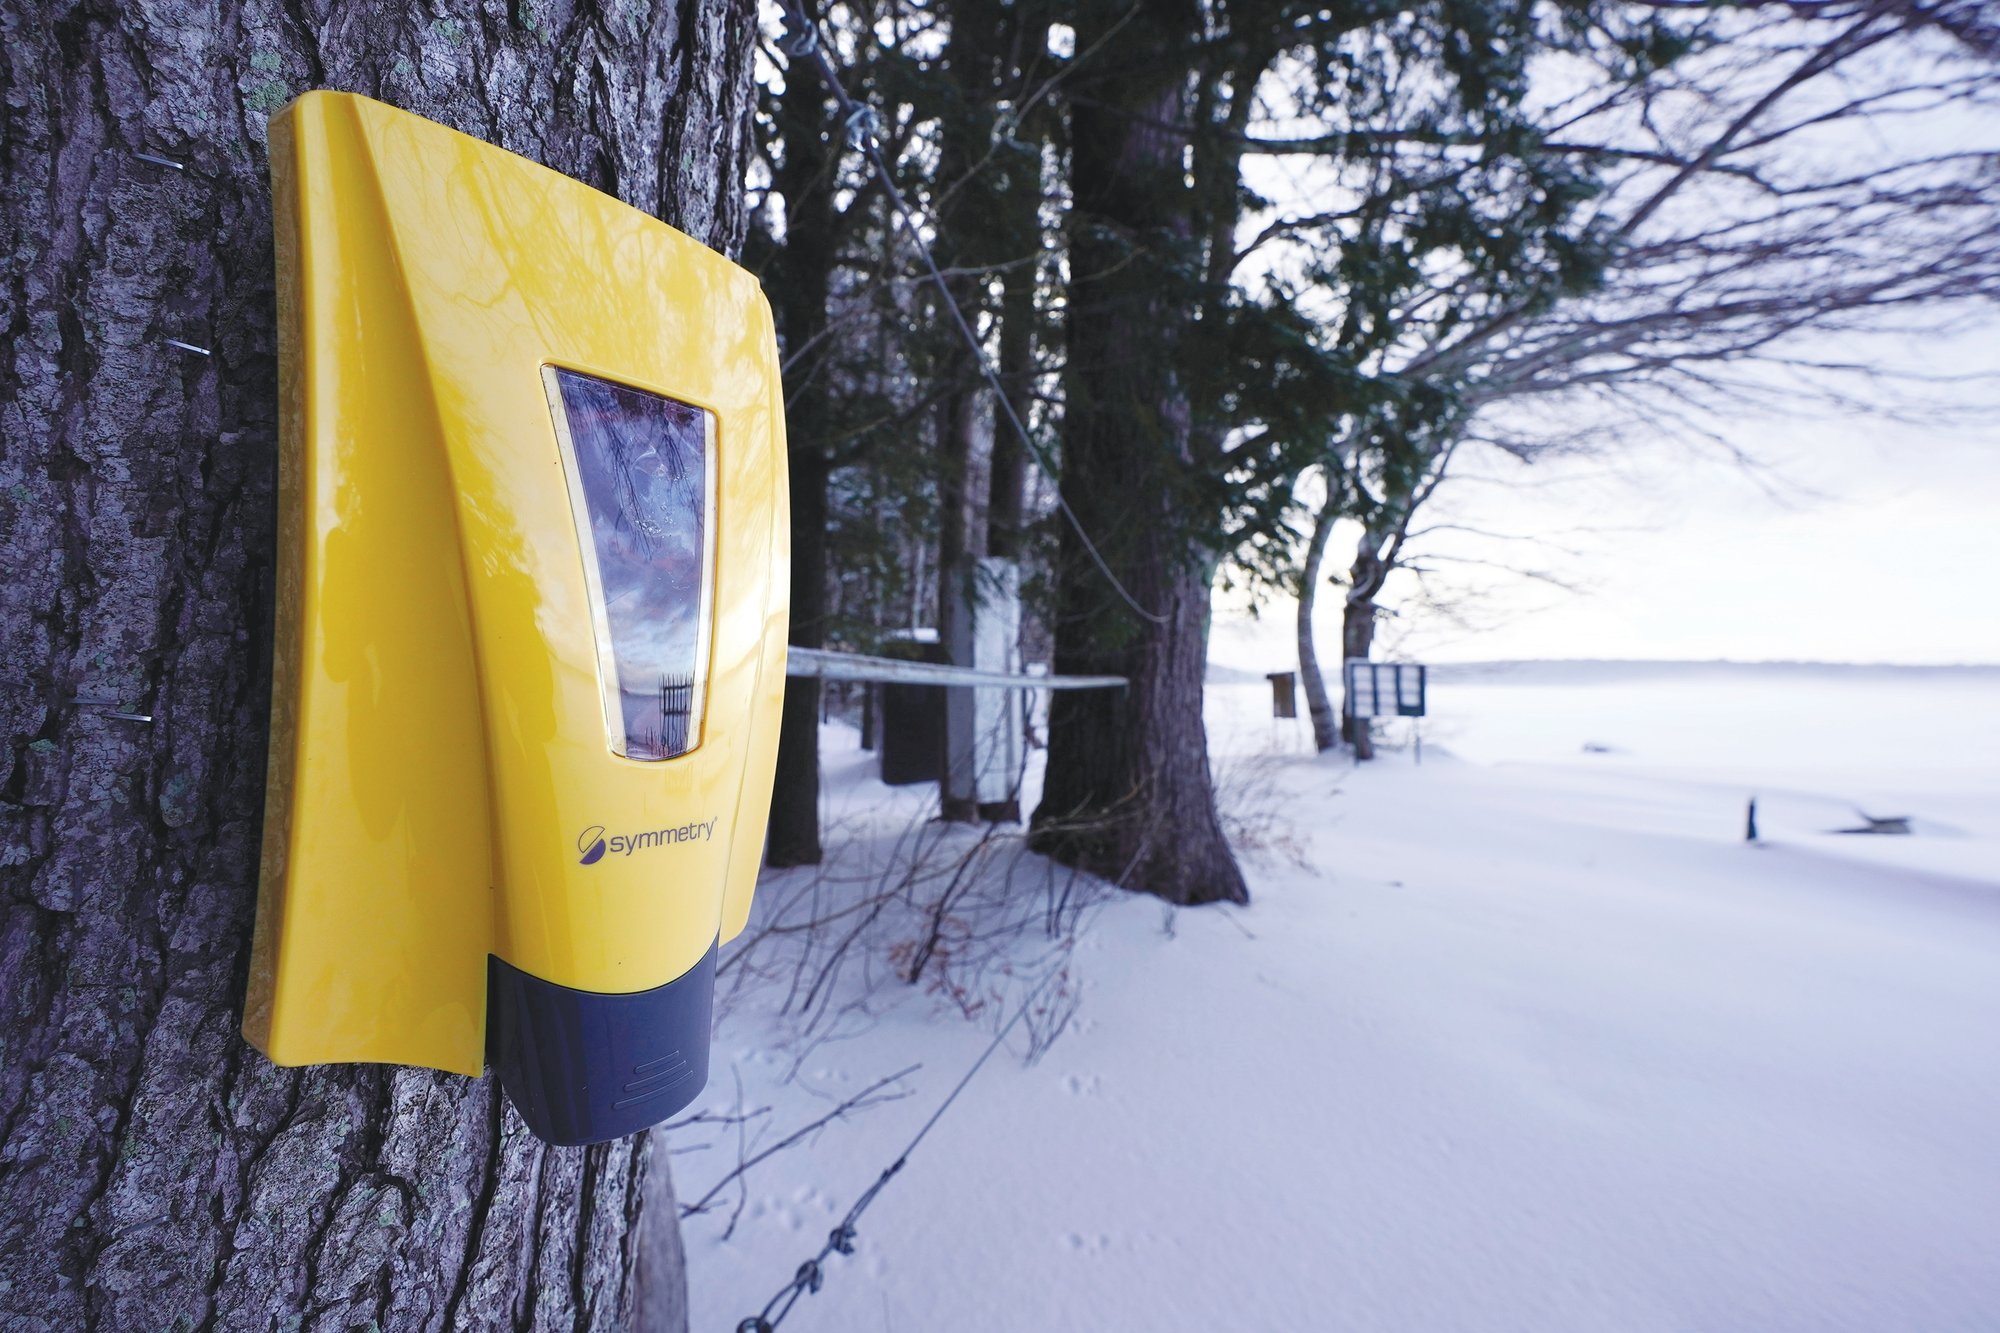 A hand sanitizer dispenser remains mounted to a tree at Camp Fernwood, a summer camp for girls, on Feb. 20 in Poland, Maine. Camp directors across the country are feeling more confident about reopening this summer after a pandemic hiatus in 2020, but in some states, they are still awaiting guidelines.